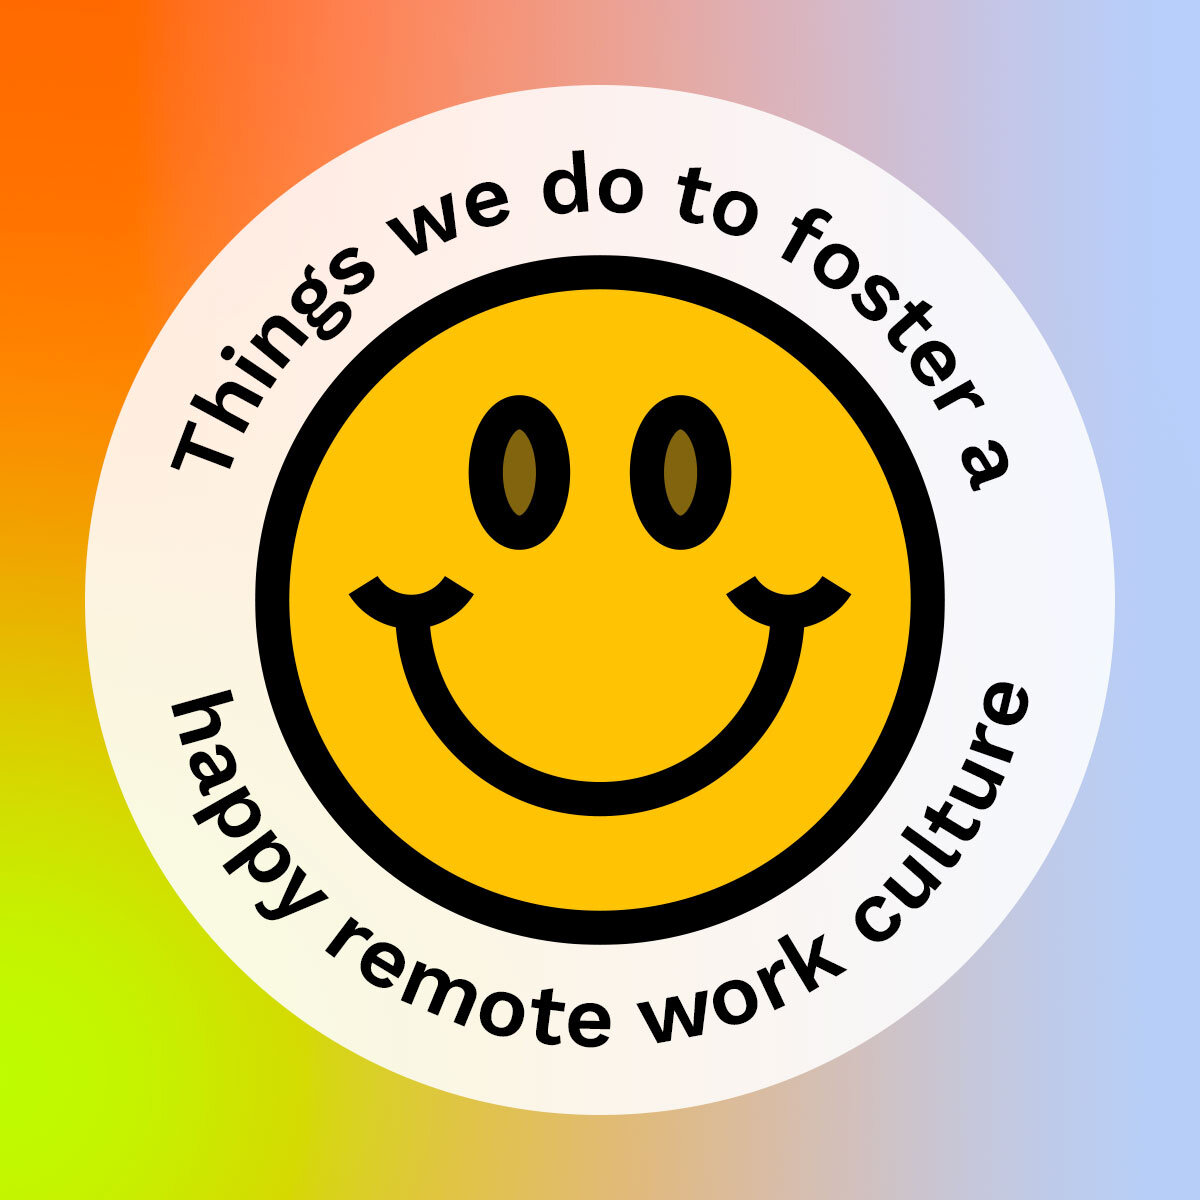 Remote work has been under the microscope for the last few years, but we determined early on that it's a great fit for us. Take a look at what practices we have adopted here at the Labs to keep things posi and productive.